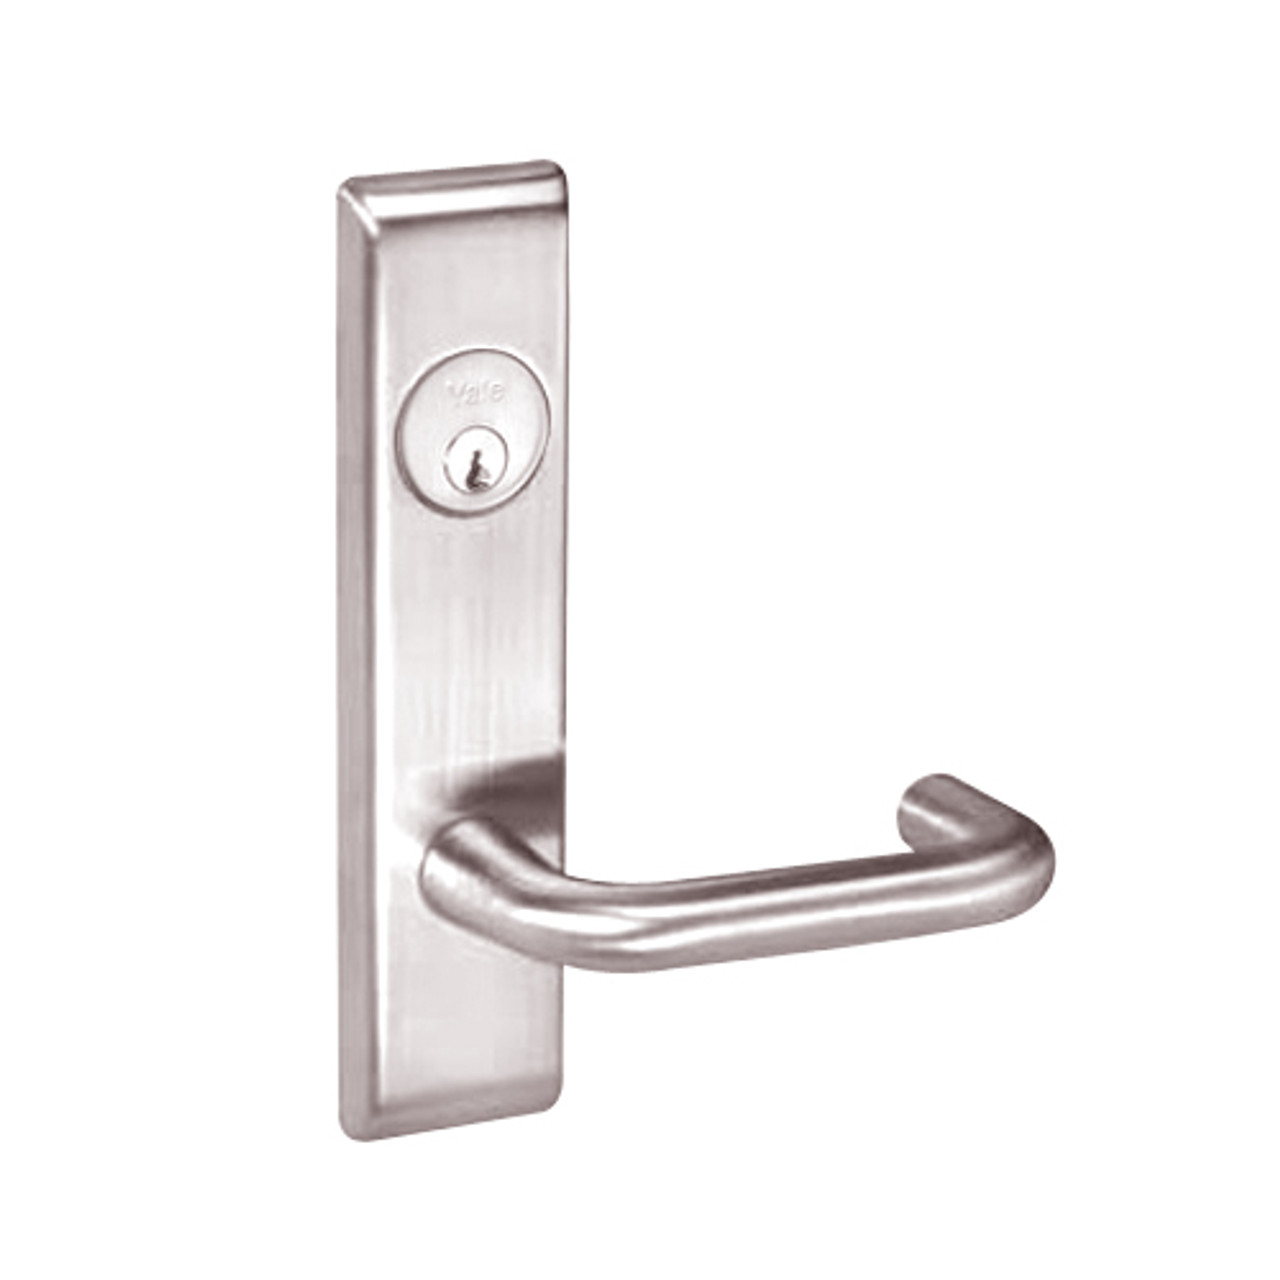 CRCN8807FL-629 Yale 8800FL Series Single Cylinder Mortise Entrance Locks with Carmel Lever in Bright Stainless Steel